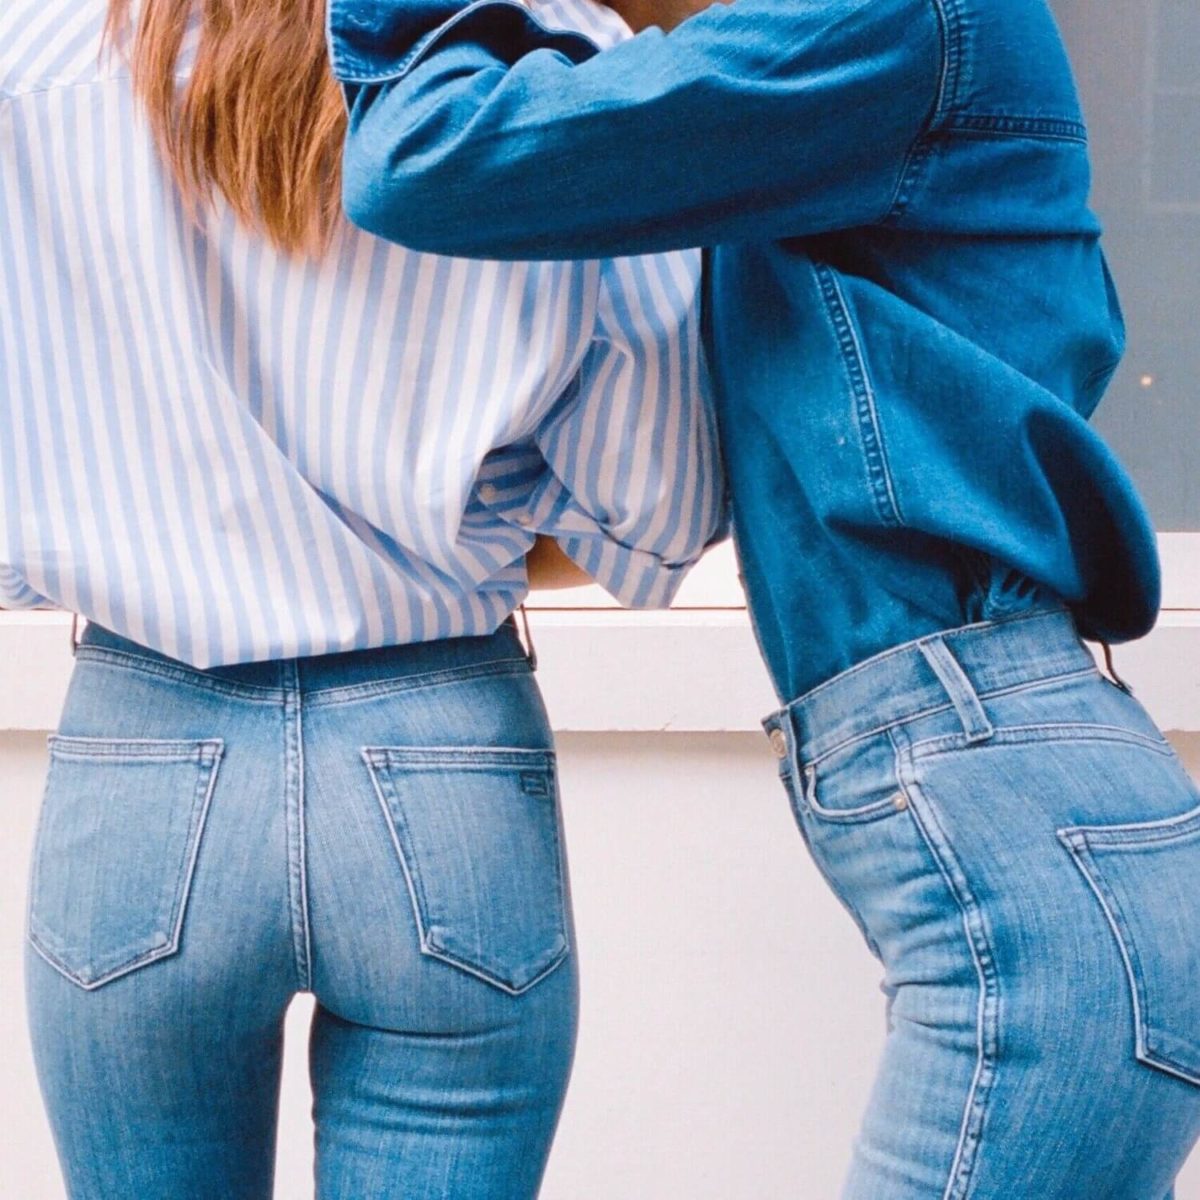 AYR Jeans Review - Must Read This Before Buying